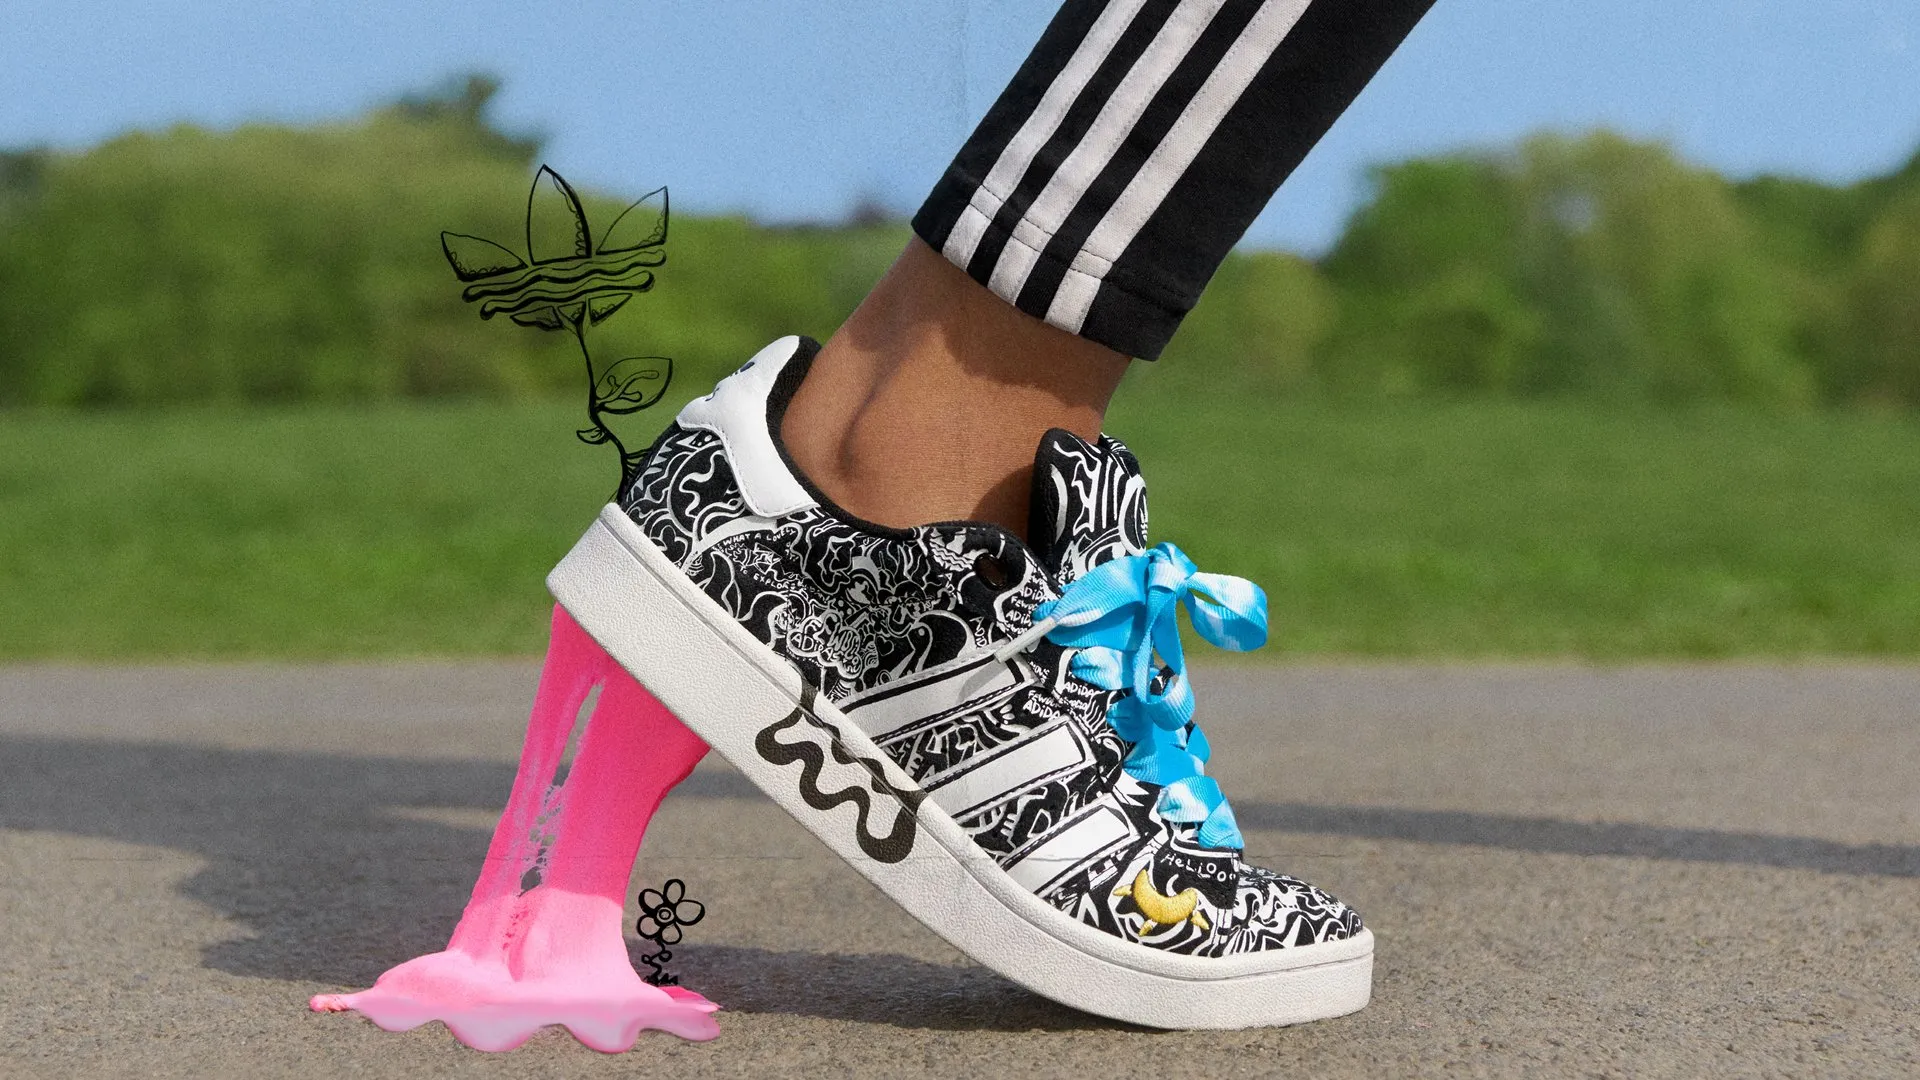 Adidas and Fewocious have teamed up for an NFT-based sneaker drop. Image: Adidas